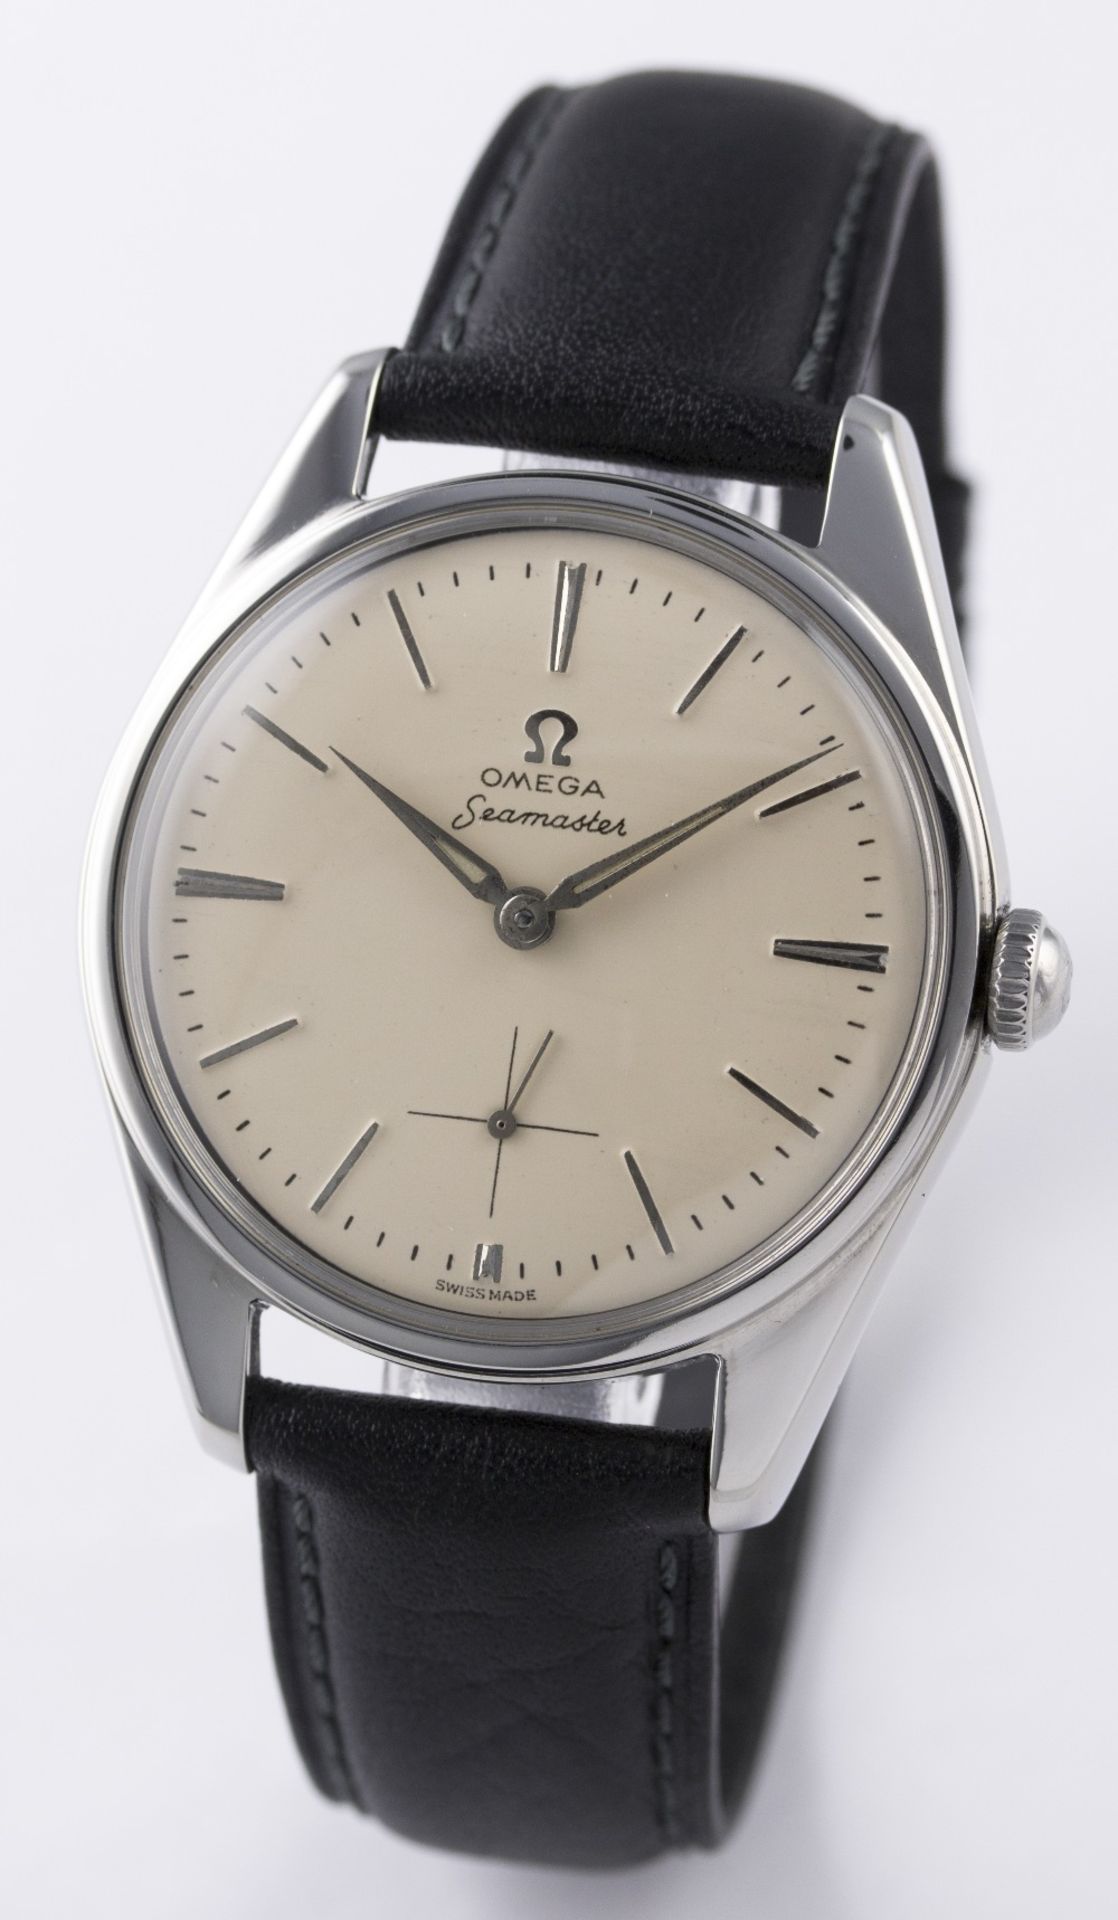 A GENTLEMAN'S LARGE SIZE STAINLESS STEEL OMEGA SEAMASTER WRIST WATCH CIRCA 1960, REF. 2990-1 - Image 2 of 8